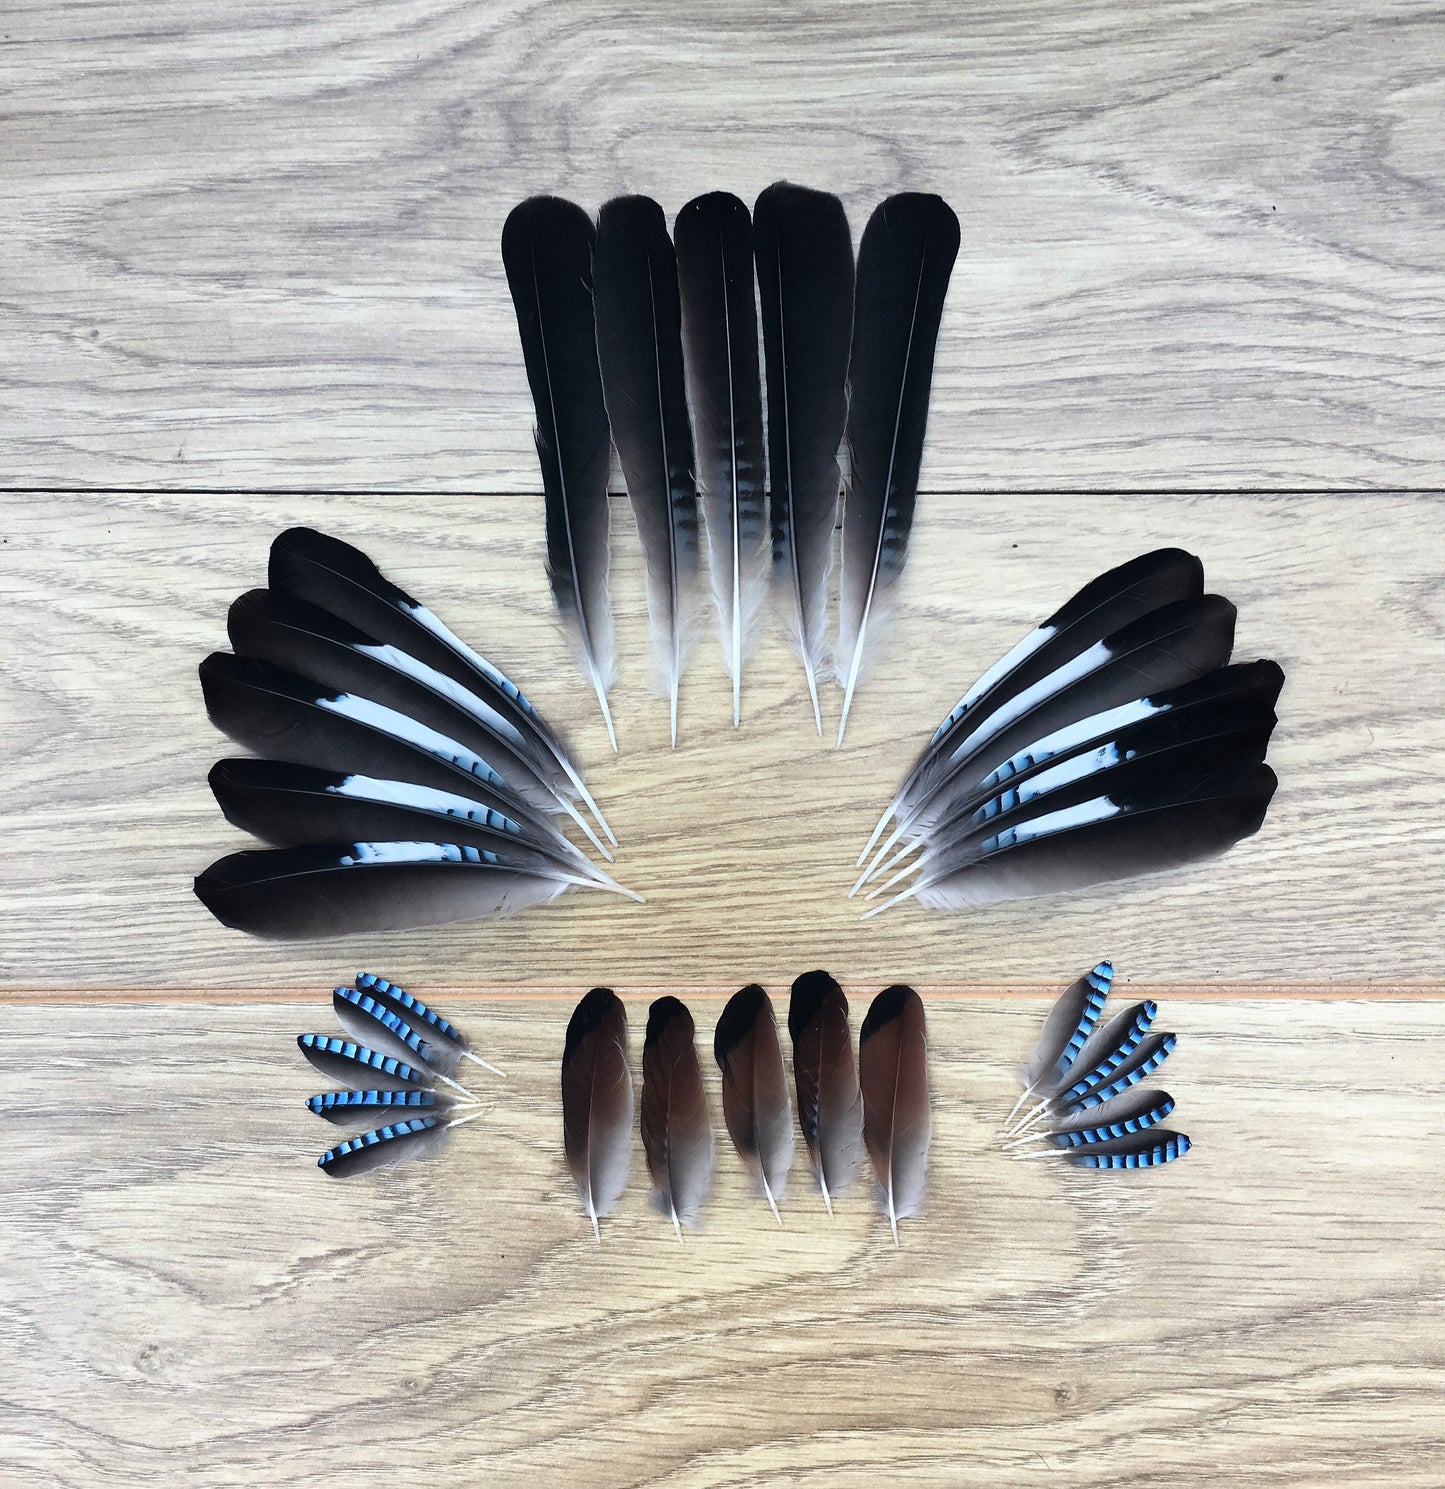 Blue Jay Feathers - Multi Pack of 30